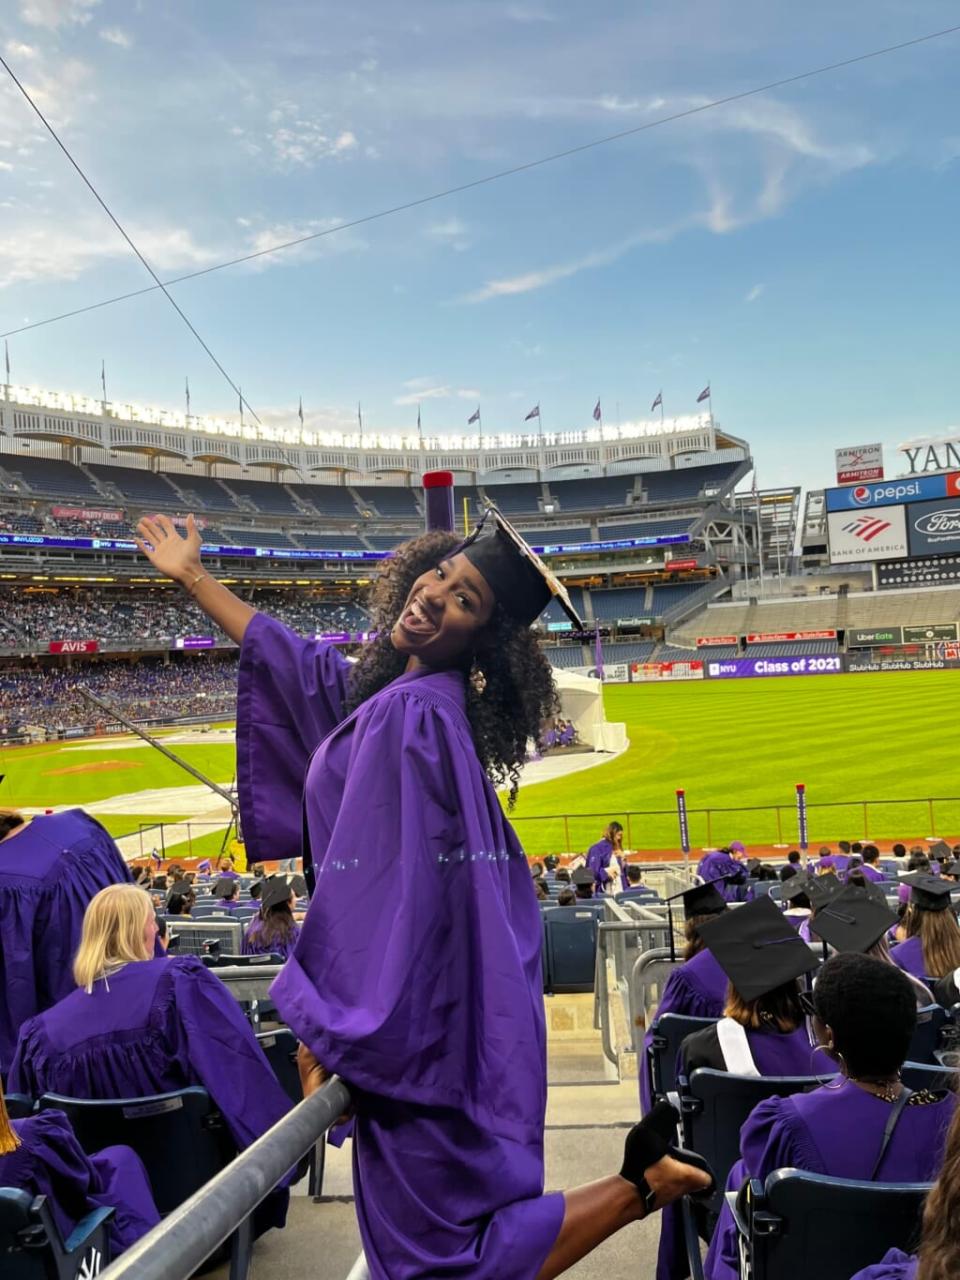 Patience Murray graduated from New York University. (Courtesy of Patience Murray)